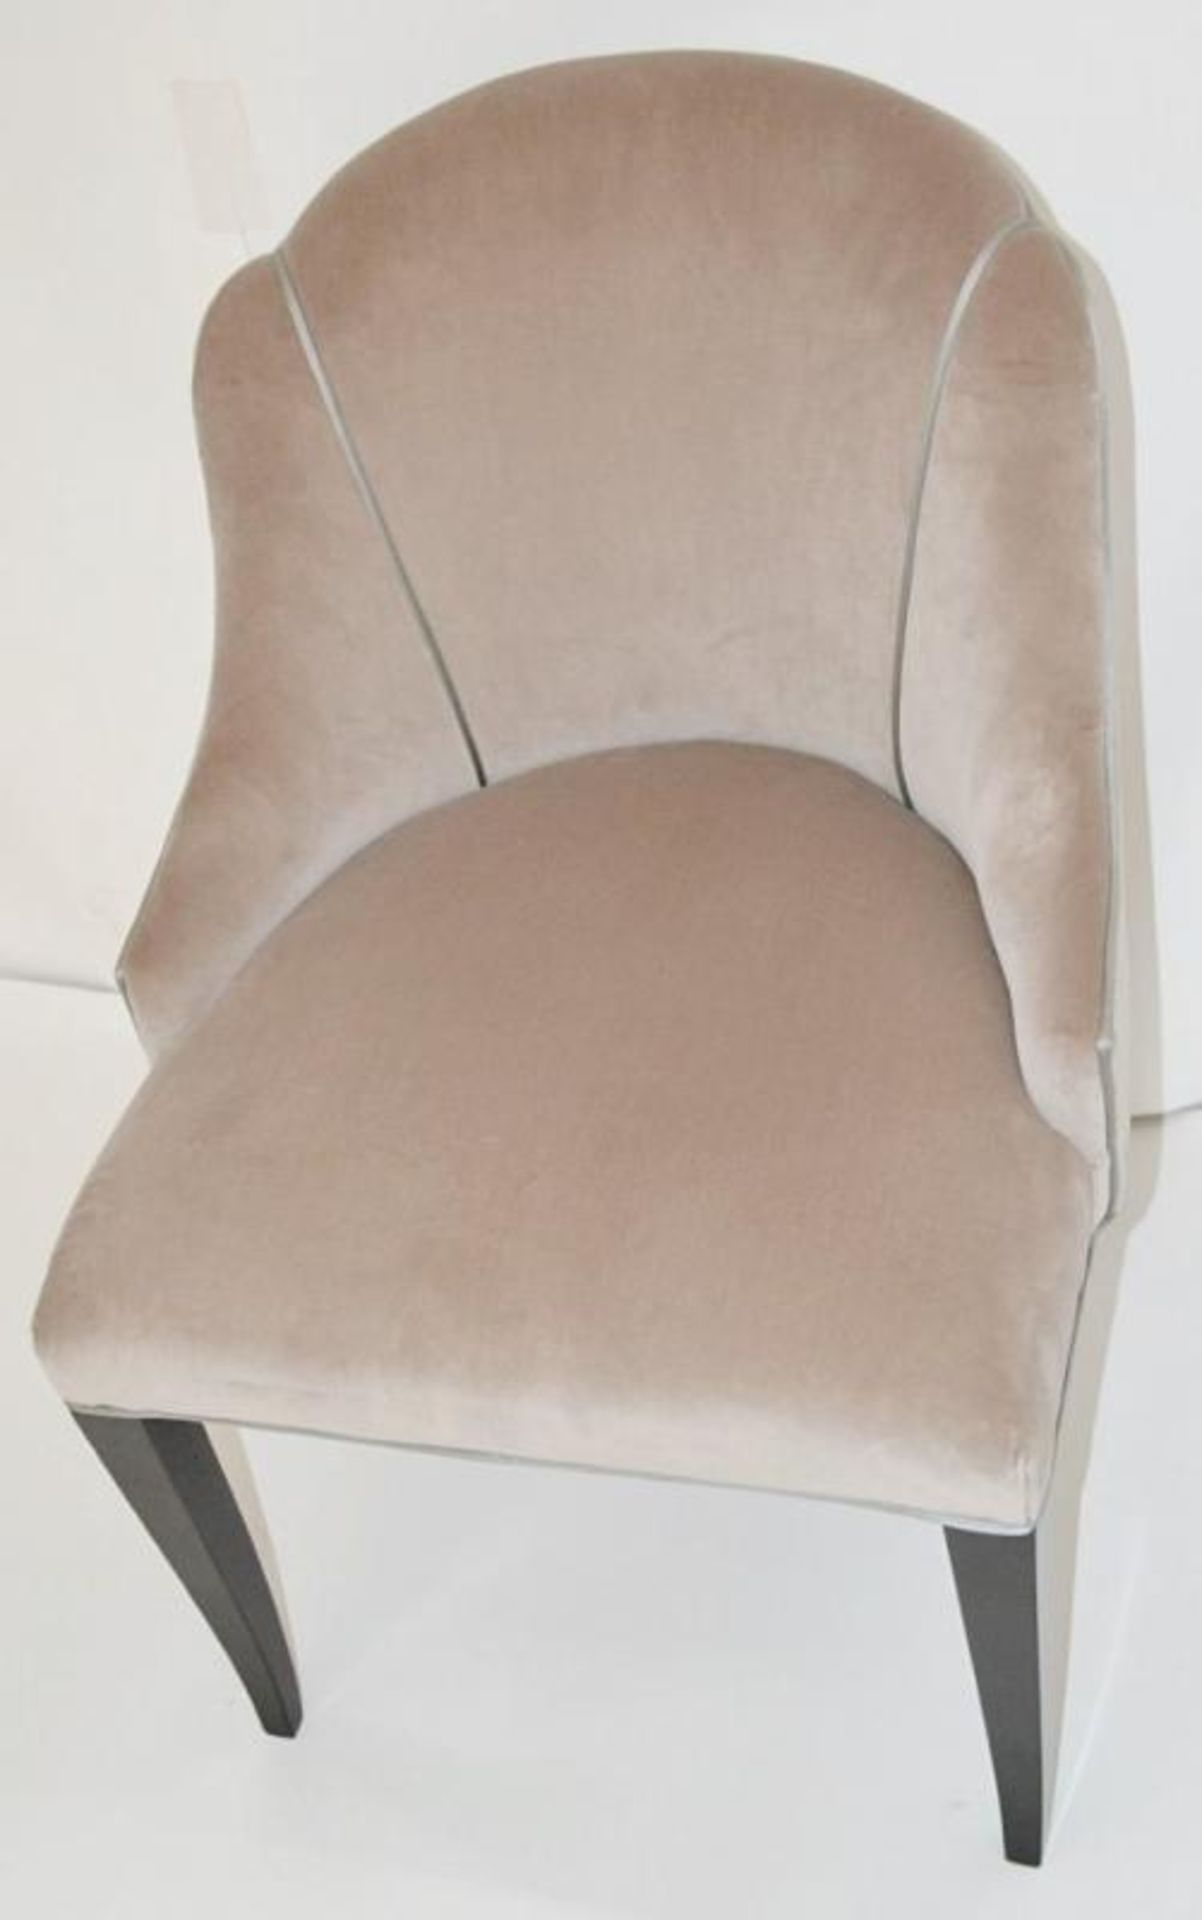 1 x REED &amp; RACKSTRAW "Cloud" Handcrafted Velvet Upholstered Chair - Dimensions: H87 x W58 x D5 - Image 4 of 14